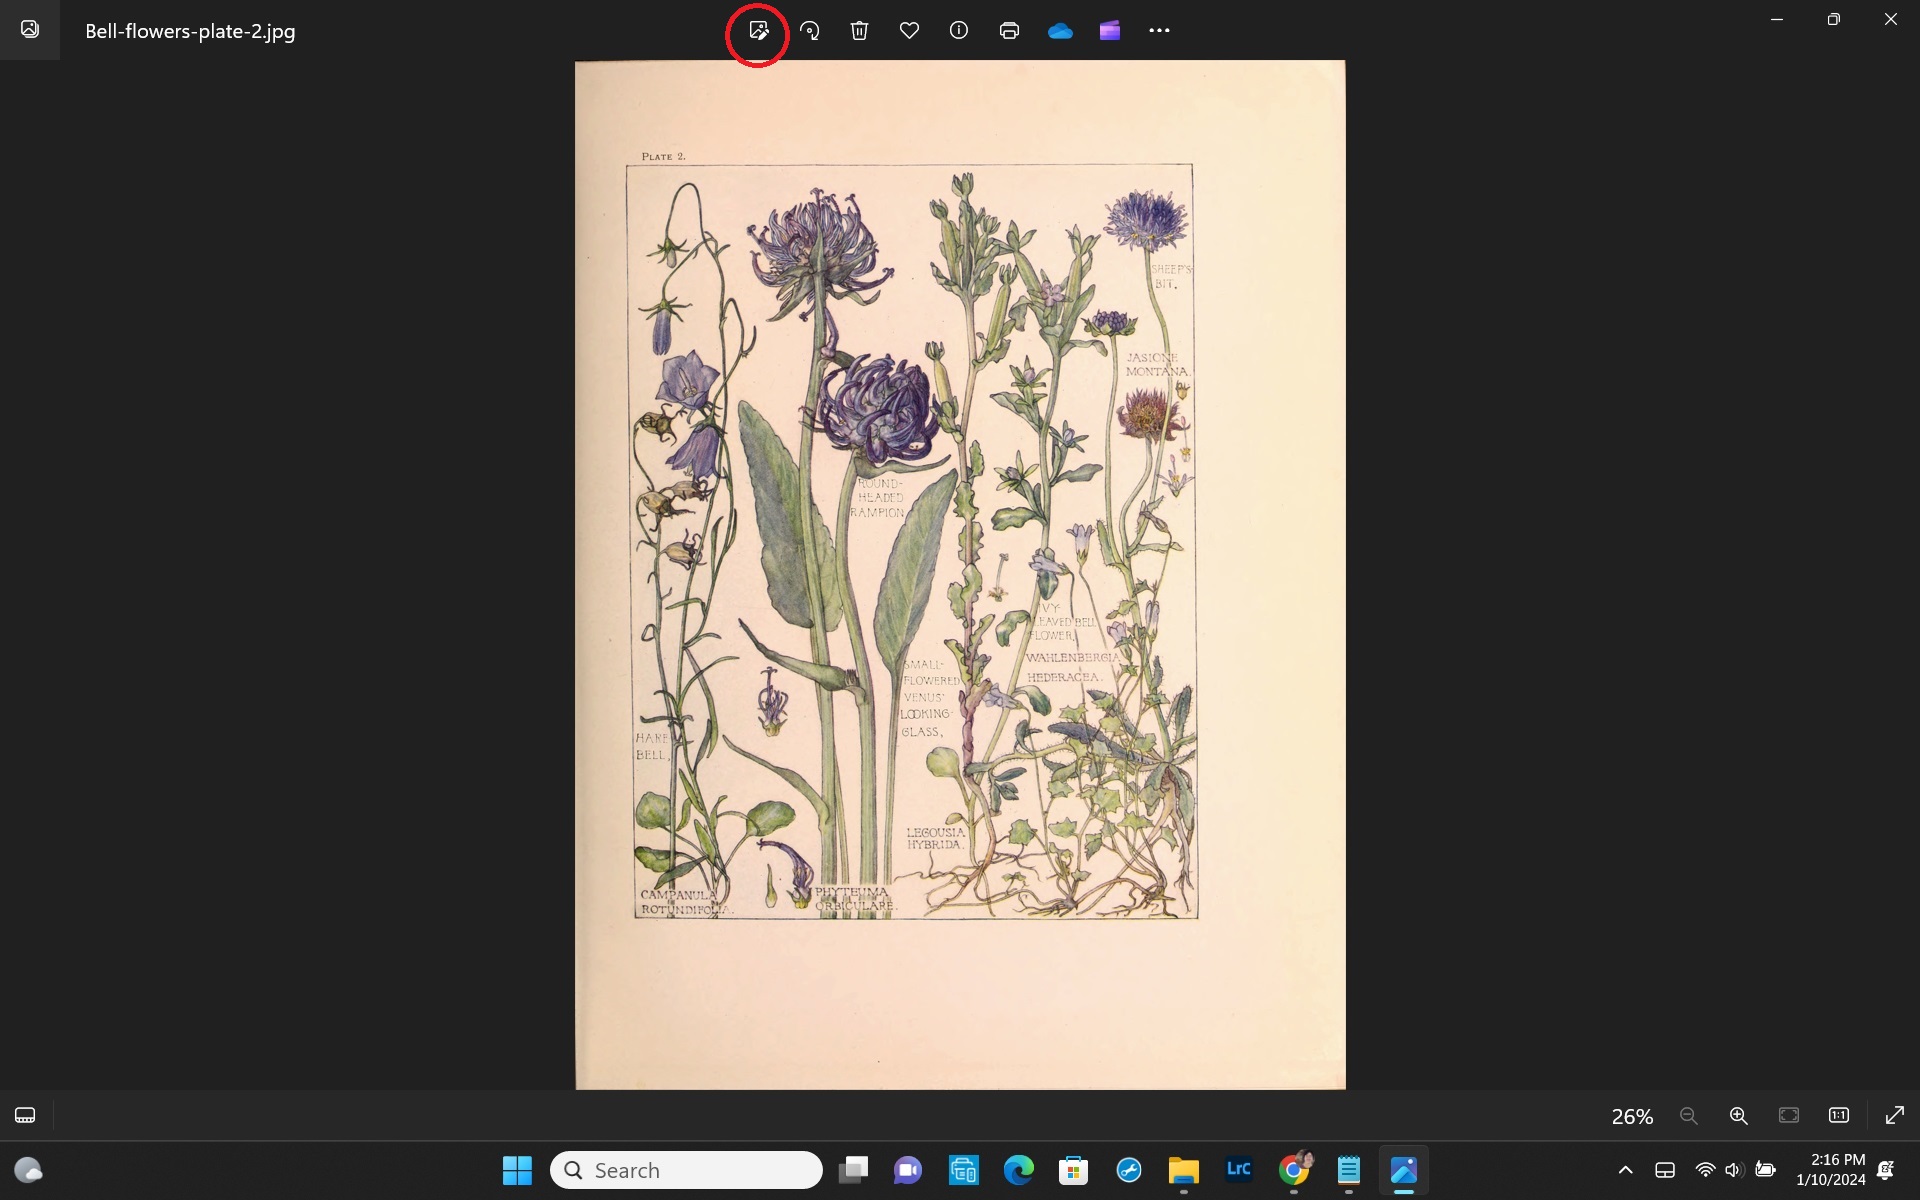 Screen shot of a vintage botanical print with edit buttons.